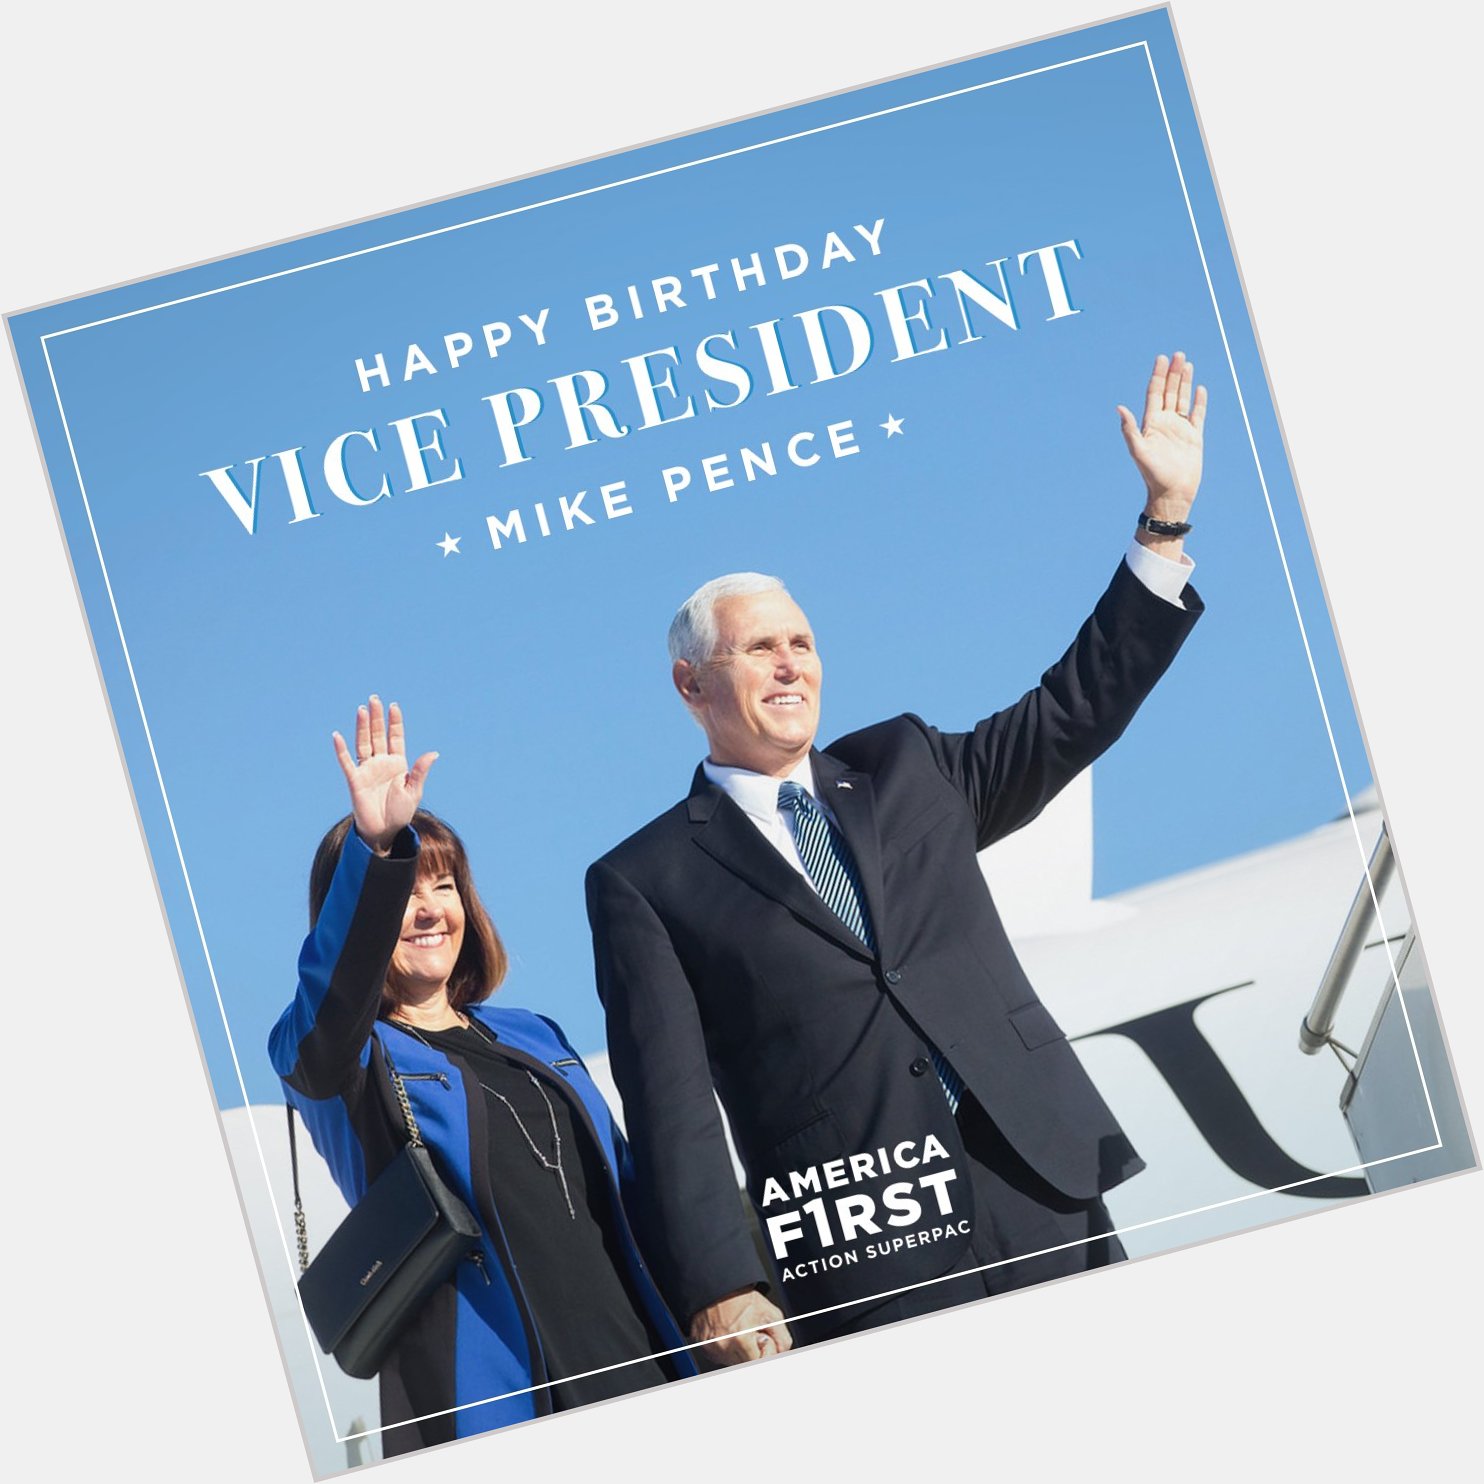 Happy birthday to our incredible Mike Pence! 